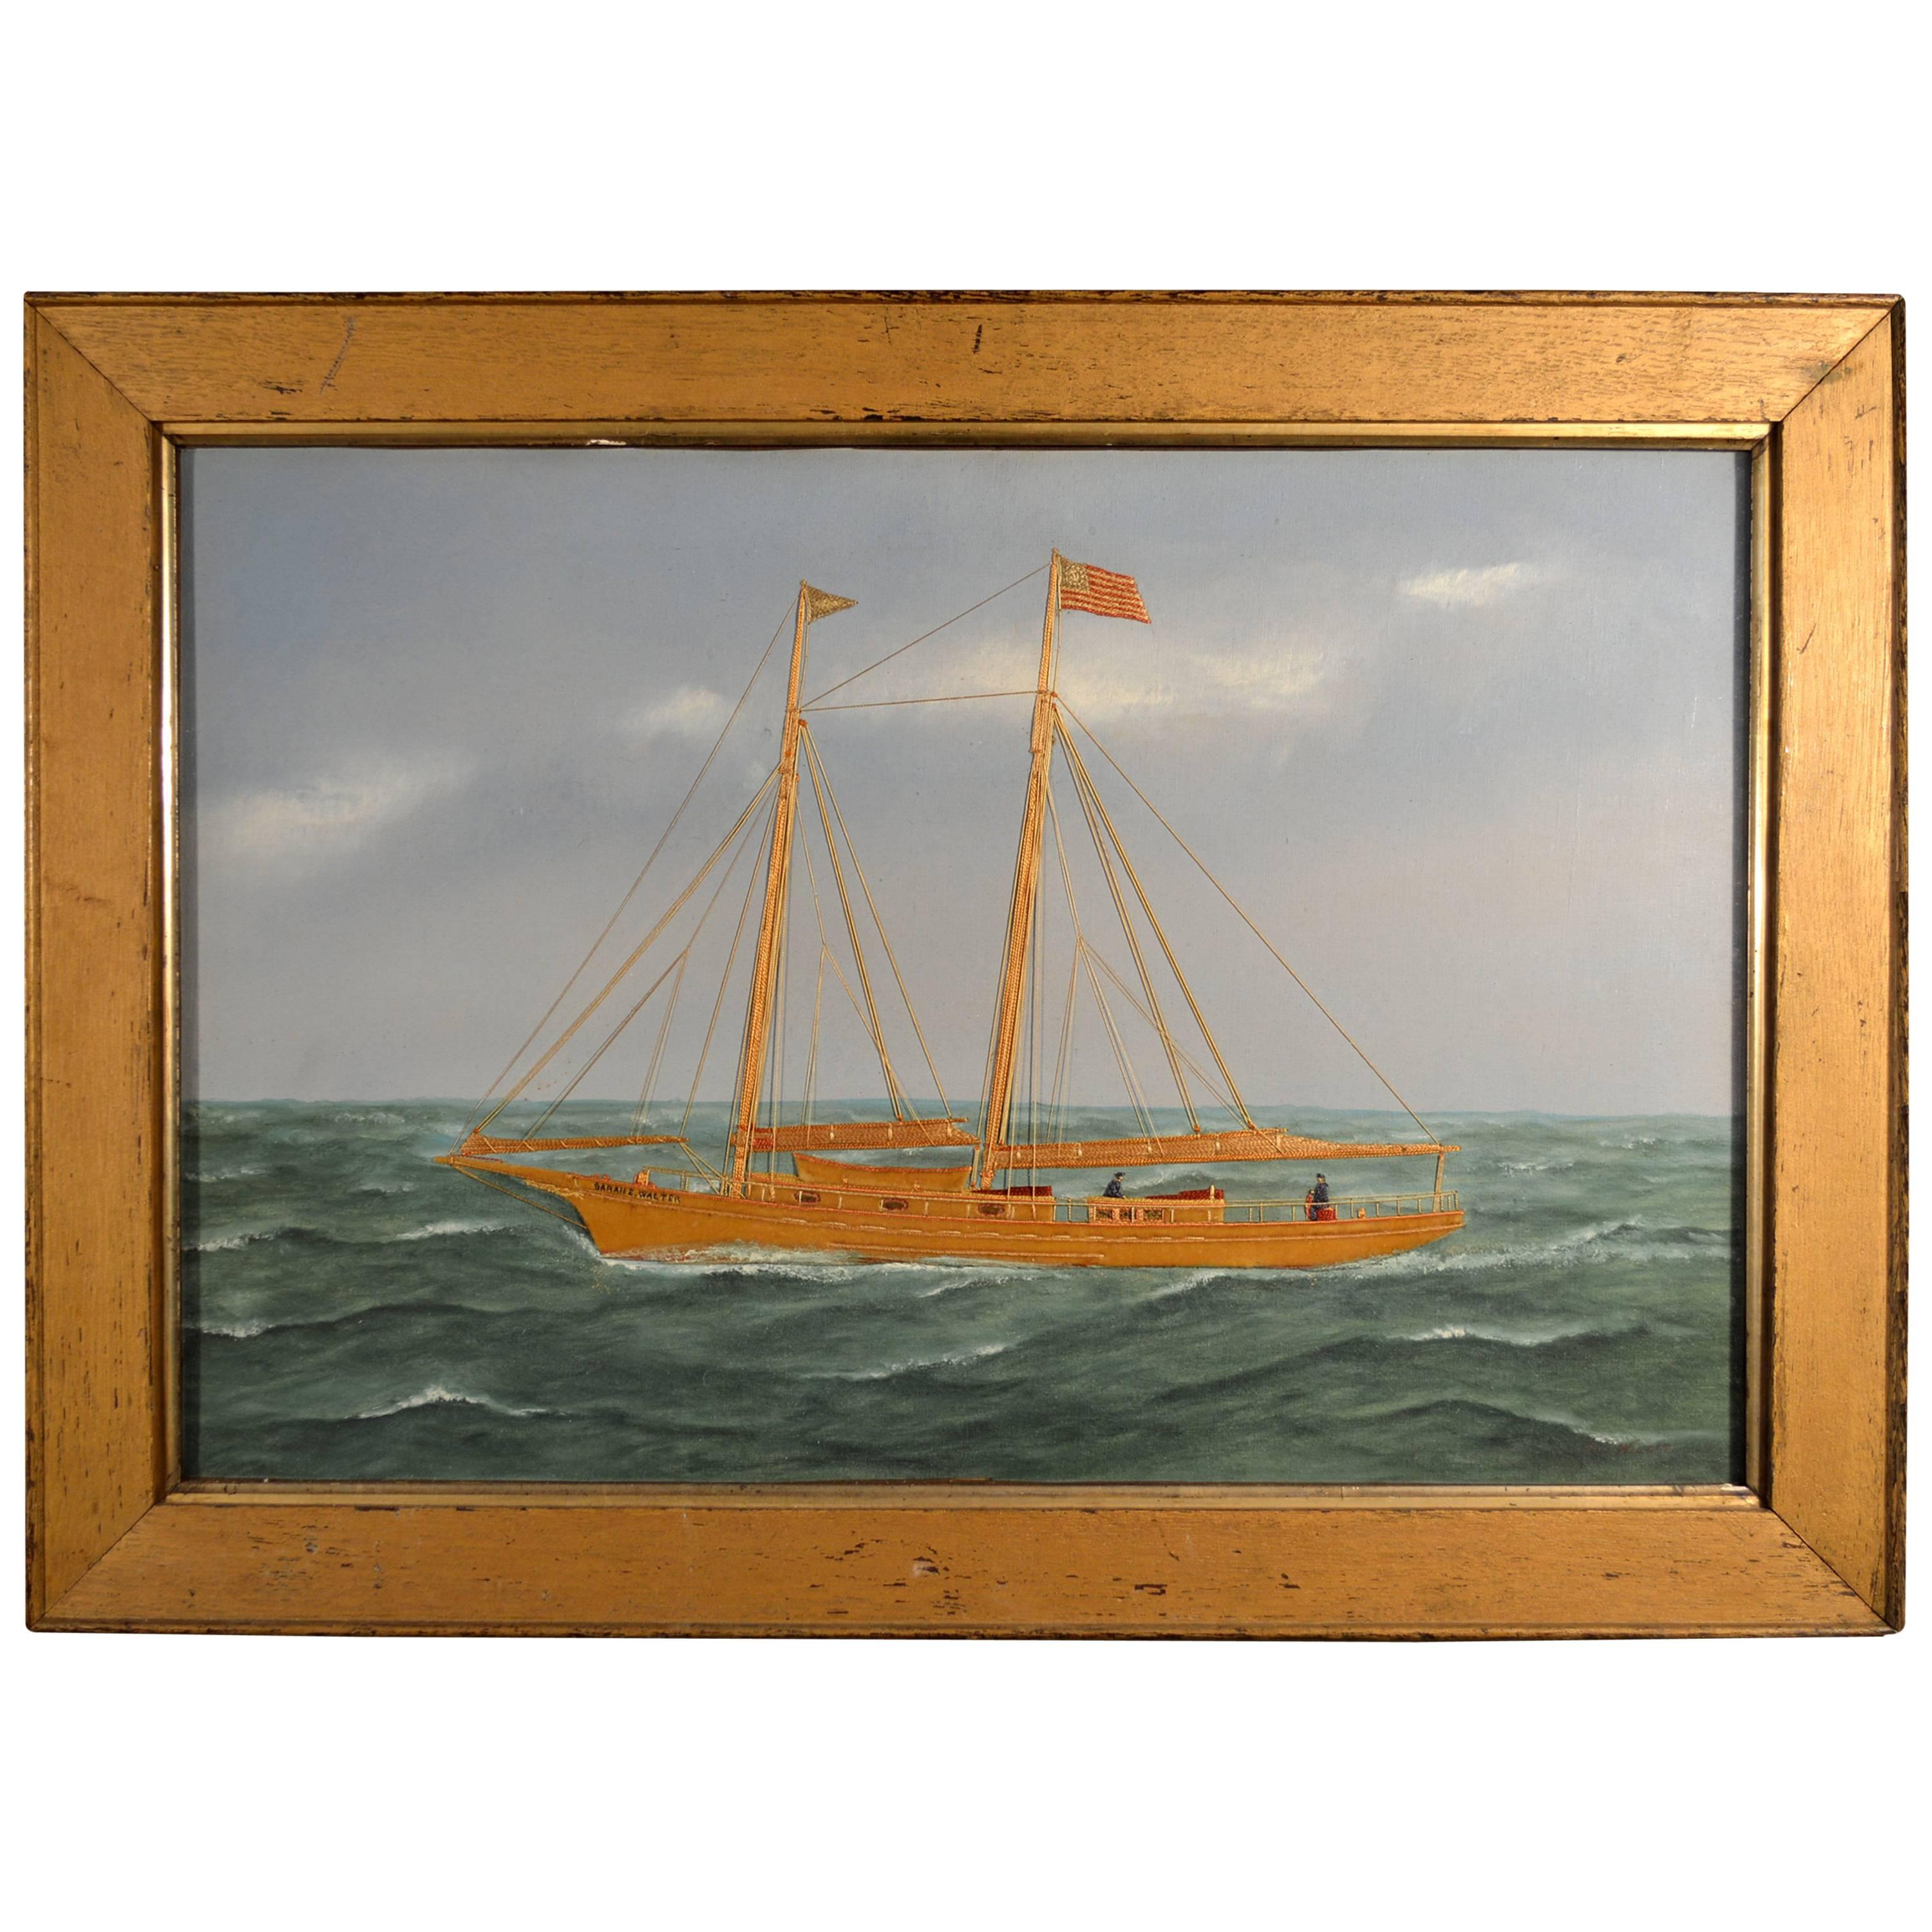 Thomas Willis Picture of the Two-Masted Schooner, Sarah E. Walters